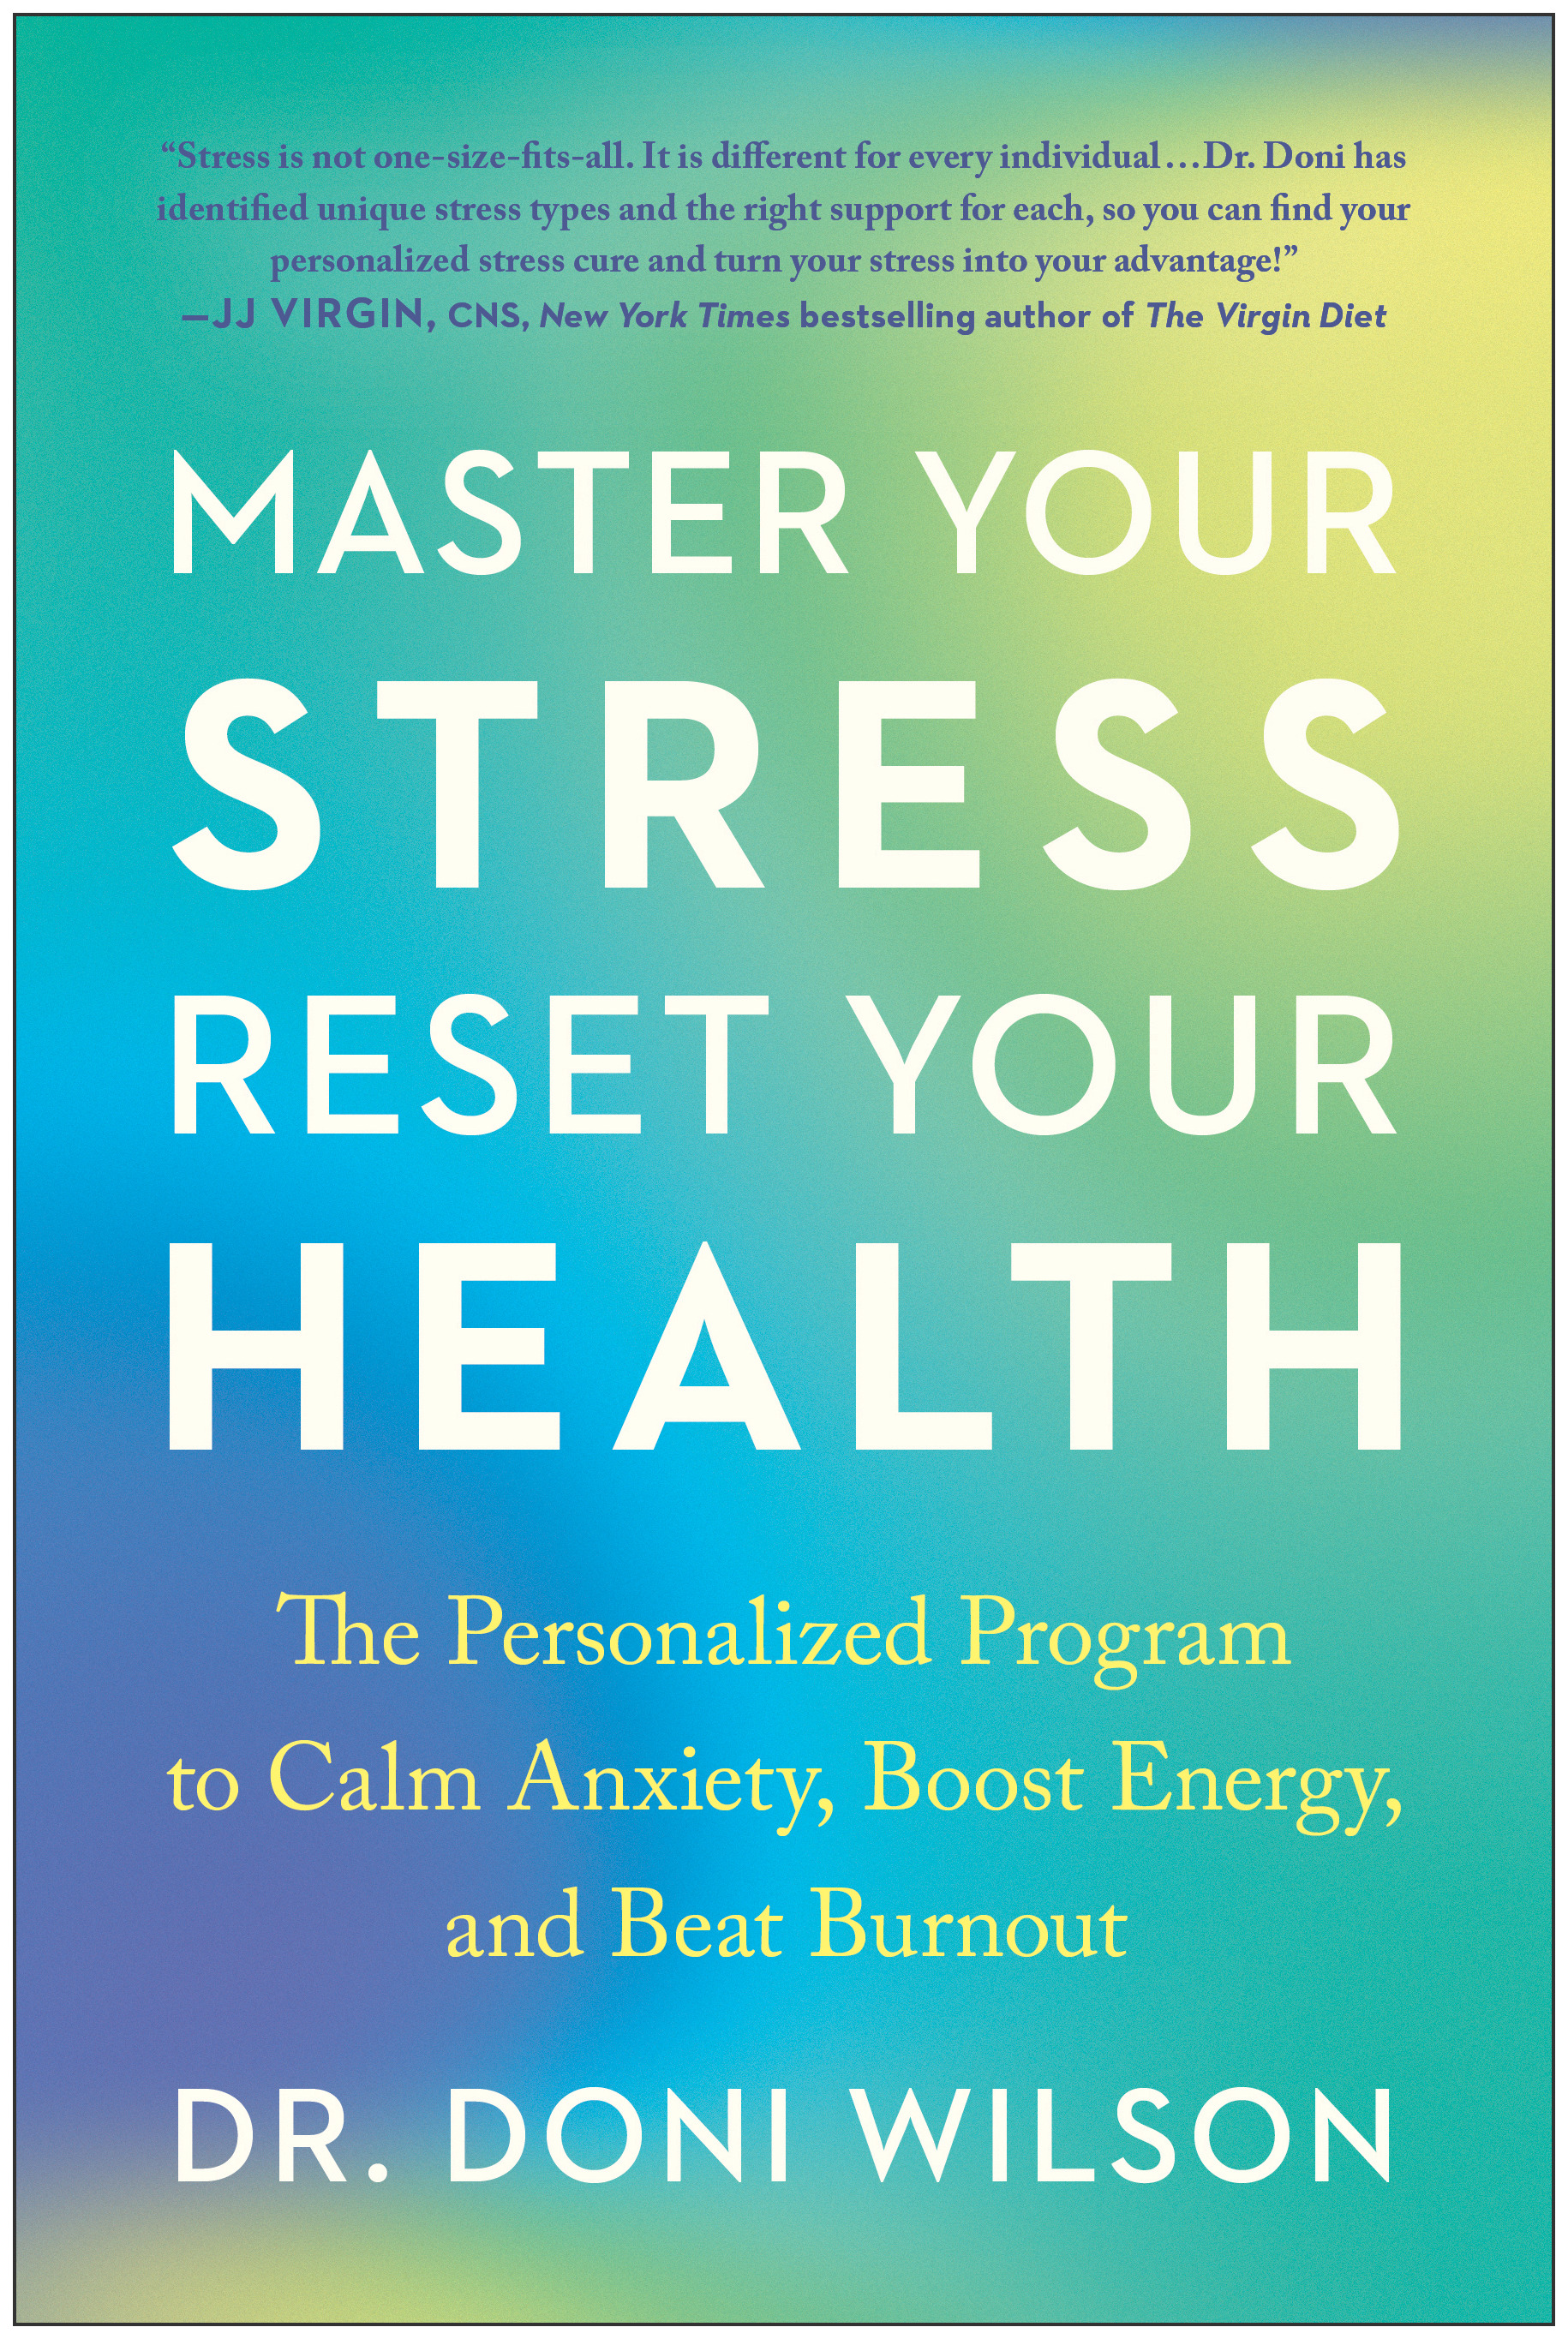 Master Your Stress, Reset Your Health : The Personalized Program to Calm Anxiety, Boost Energy, and Beat Burnout | Psychology & Self-Improvement